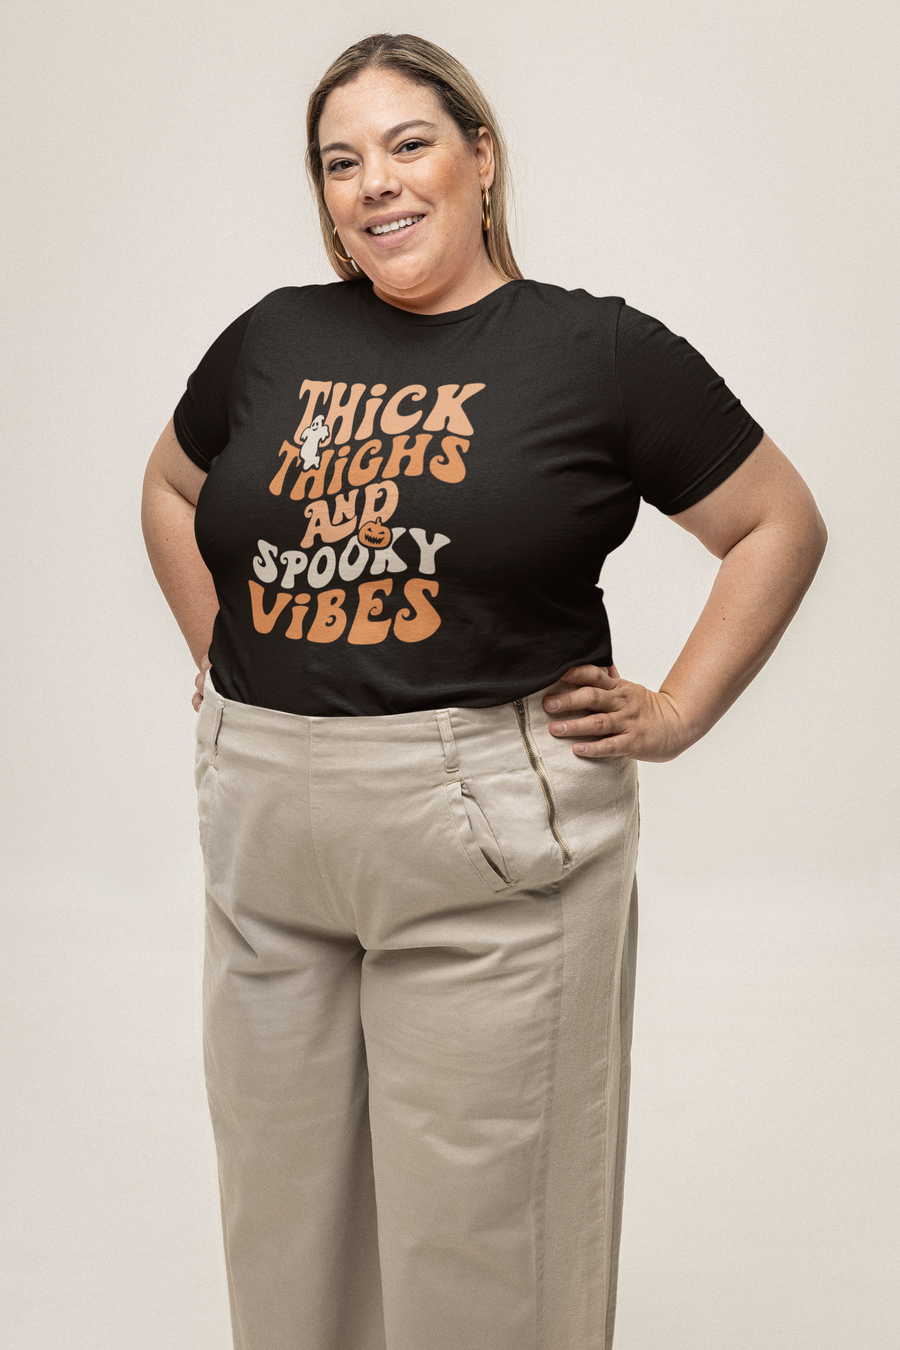 Thick Thighs & Spooky Vibes | Tee (Infant Sizes up to Adult 5X)